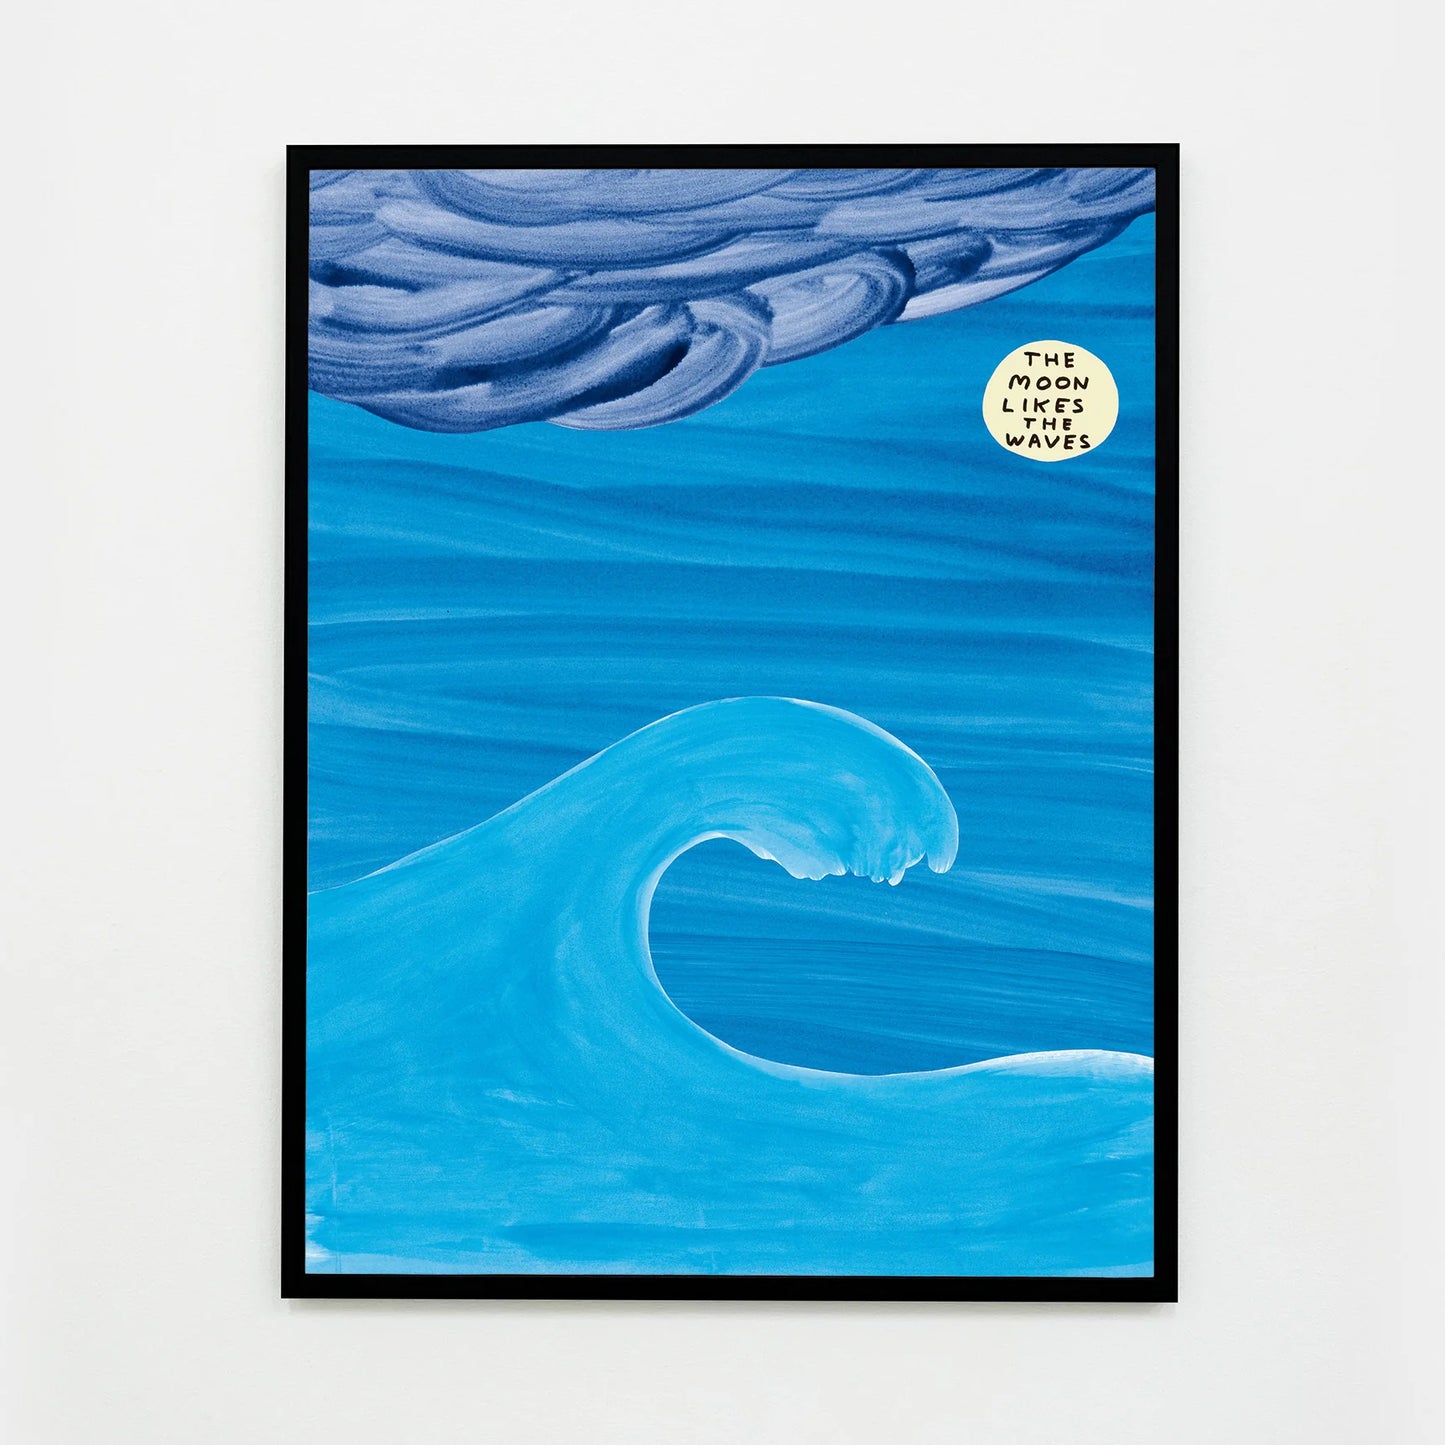 a photo of david shrigley print 'the moon', framed in a black frame, and featuring an ocean wave on a blue background and a stormy cloud, with a glowing moon, upon which the text 'the moon likes the waves' is written, all in shrigley's signature cartoonish and childlike style. David Shrigley prints, David Shrigley art prints, David Shrigley for sale, buy david shrigley prints, buy david shrigley posters, david shrigley posters for sale